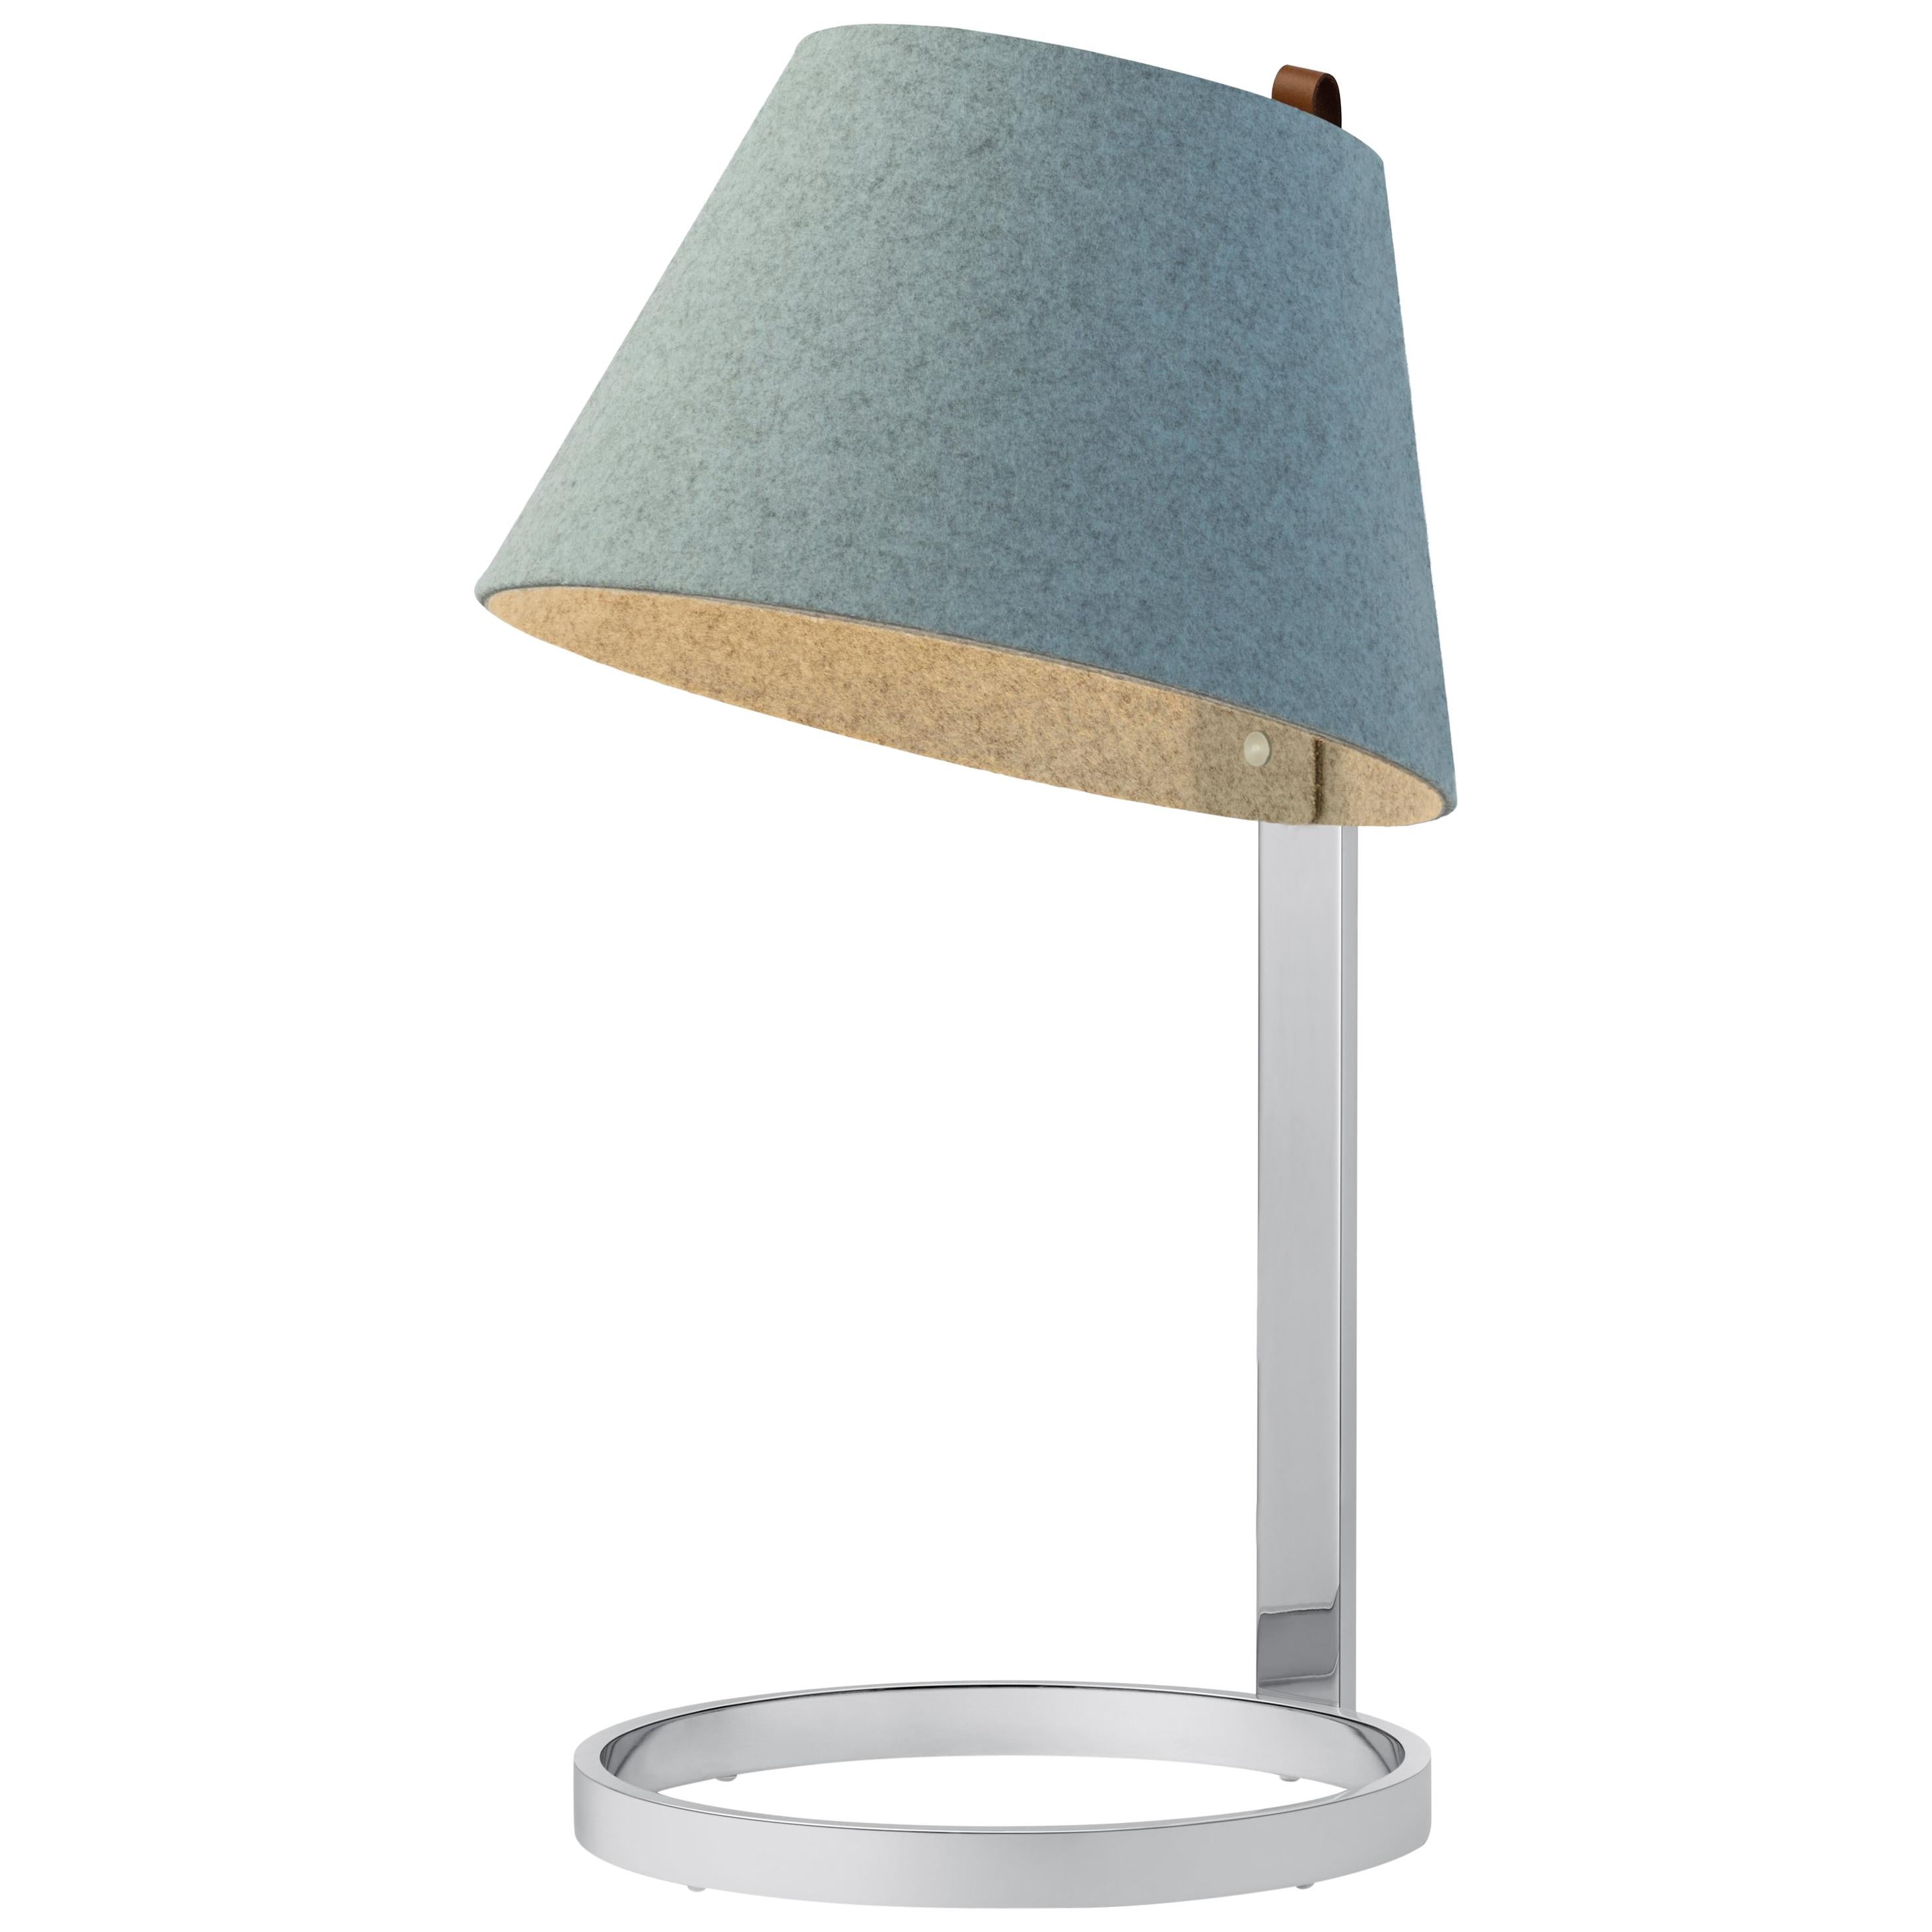 Lana Small Table Lamp in Arctic Blue and Grey with Chrome Base by Pablo Designs For Sale